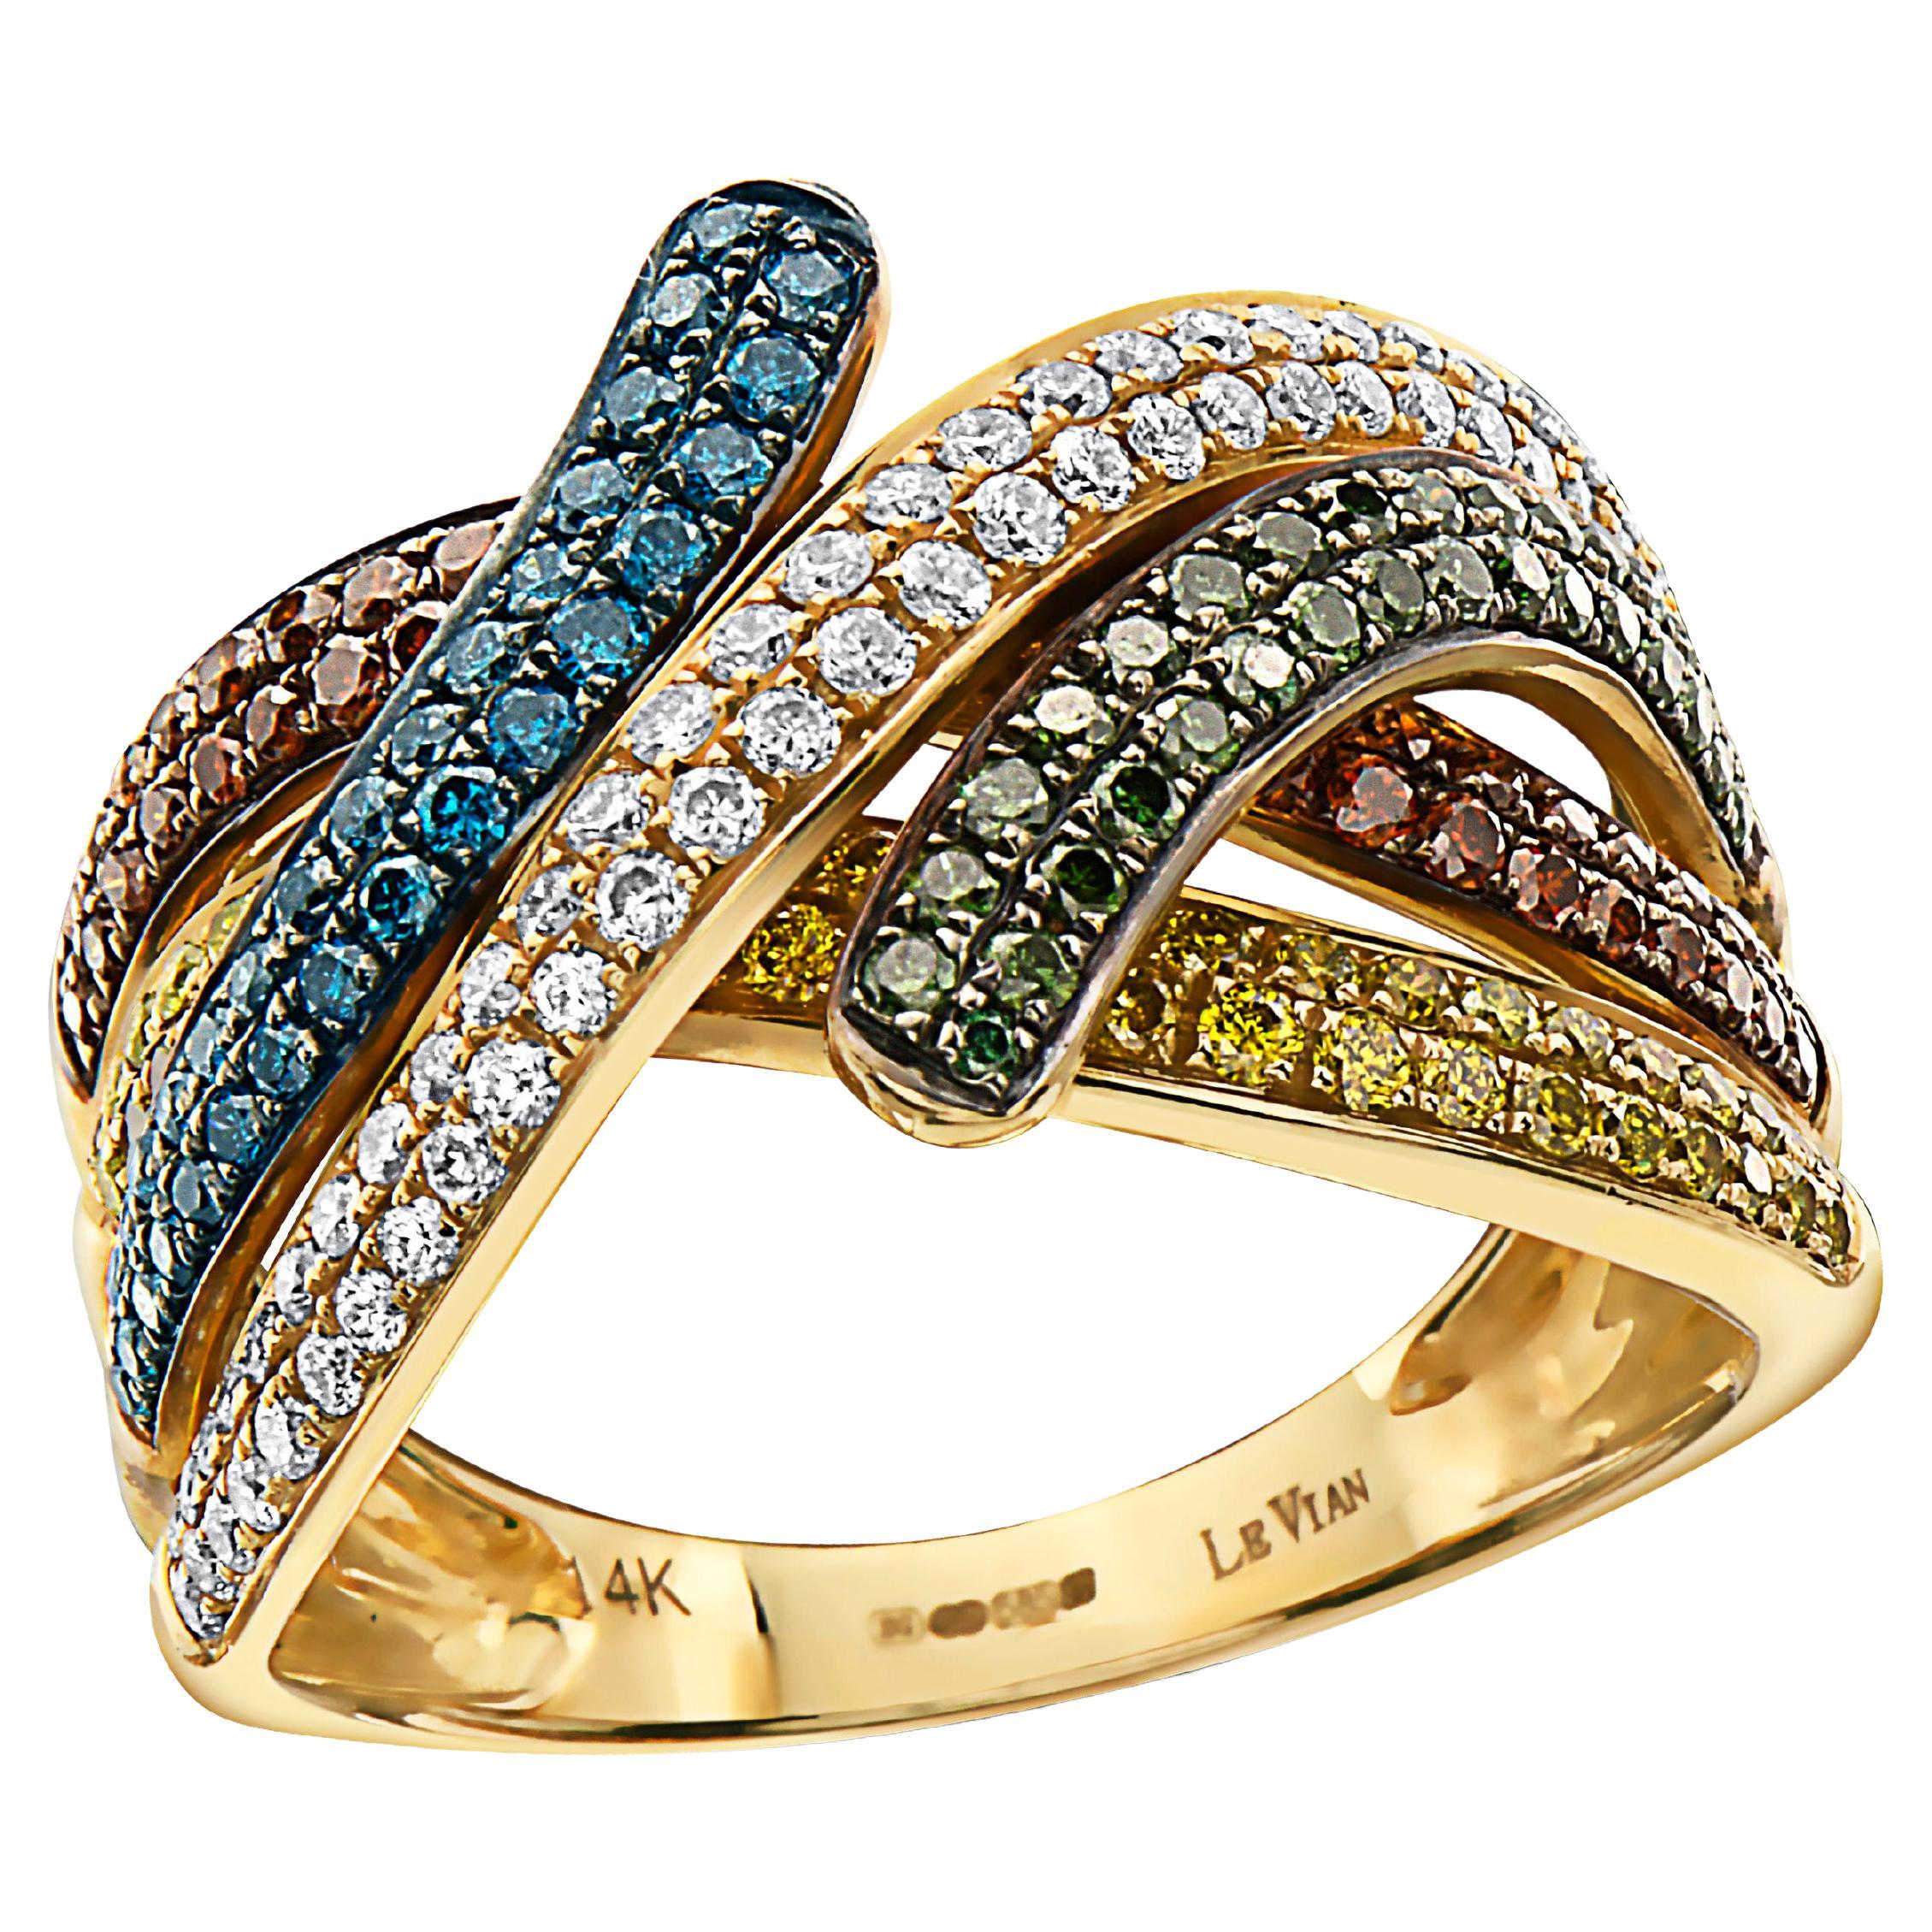 Grand Sample Sale Ring 1 1/8 Cts Yellow, Blue, White Diamonds in 14K Yellow Gold For Sale